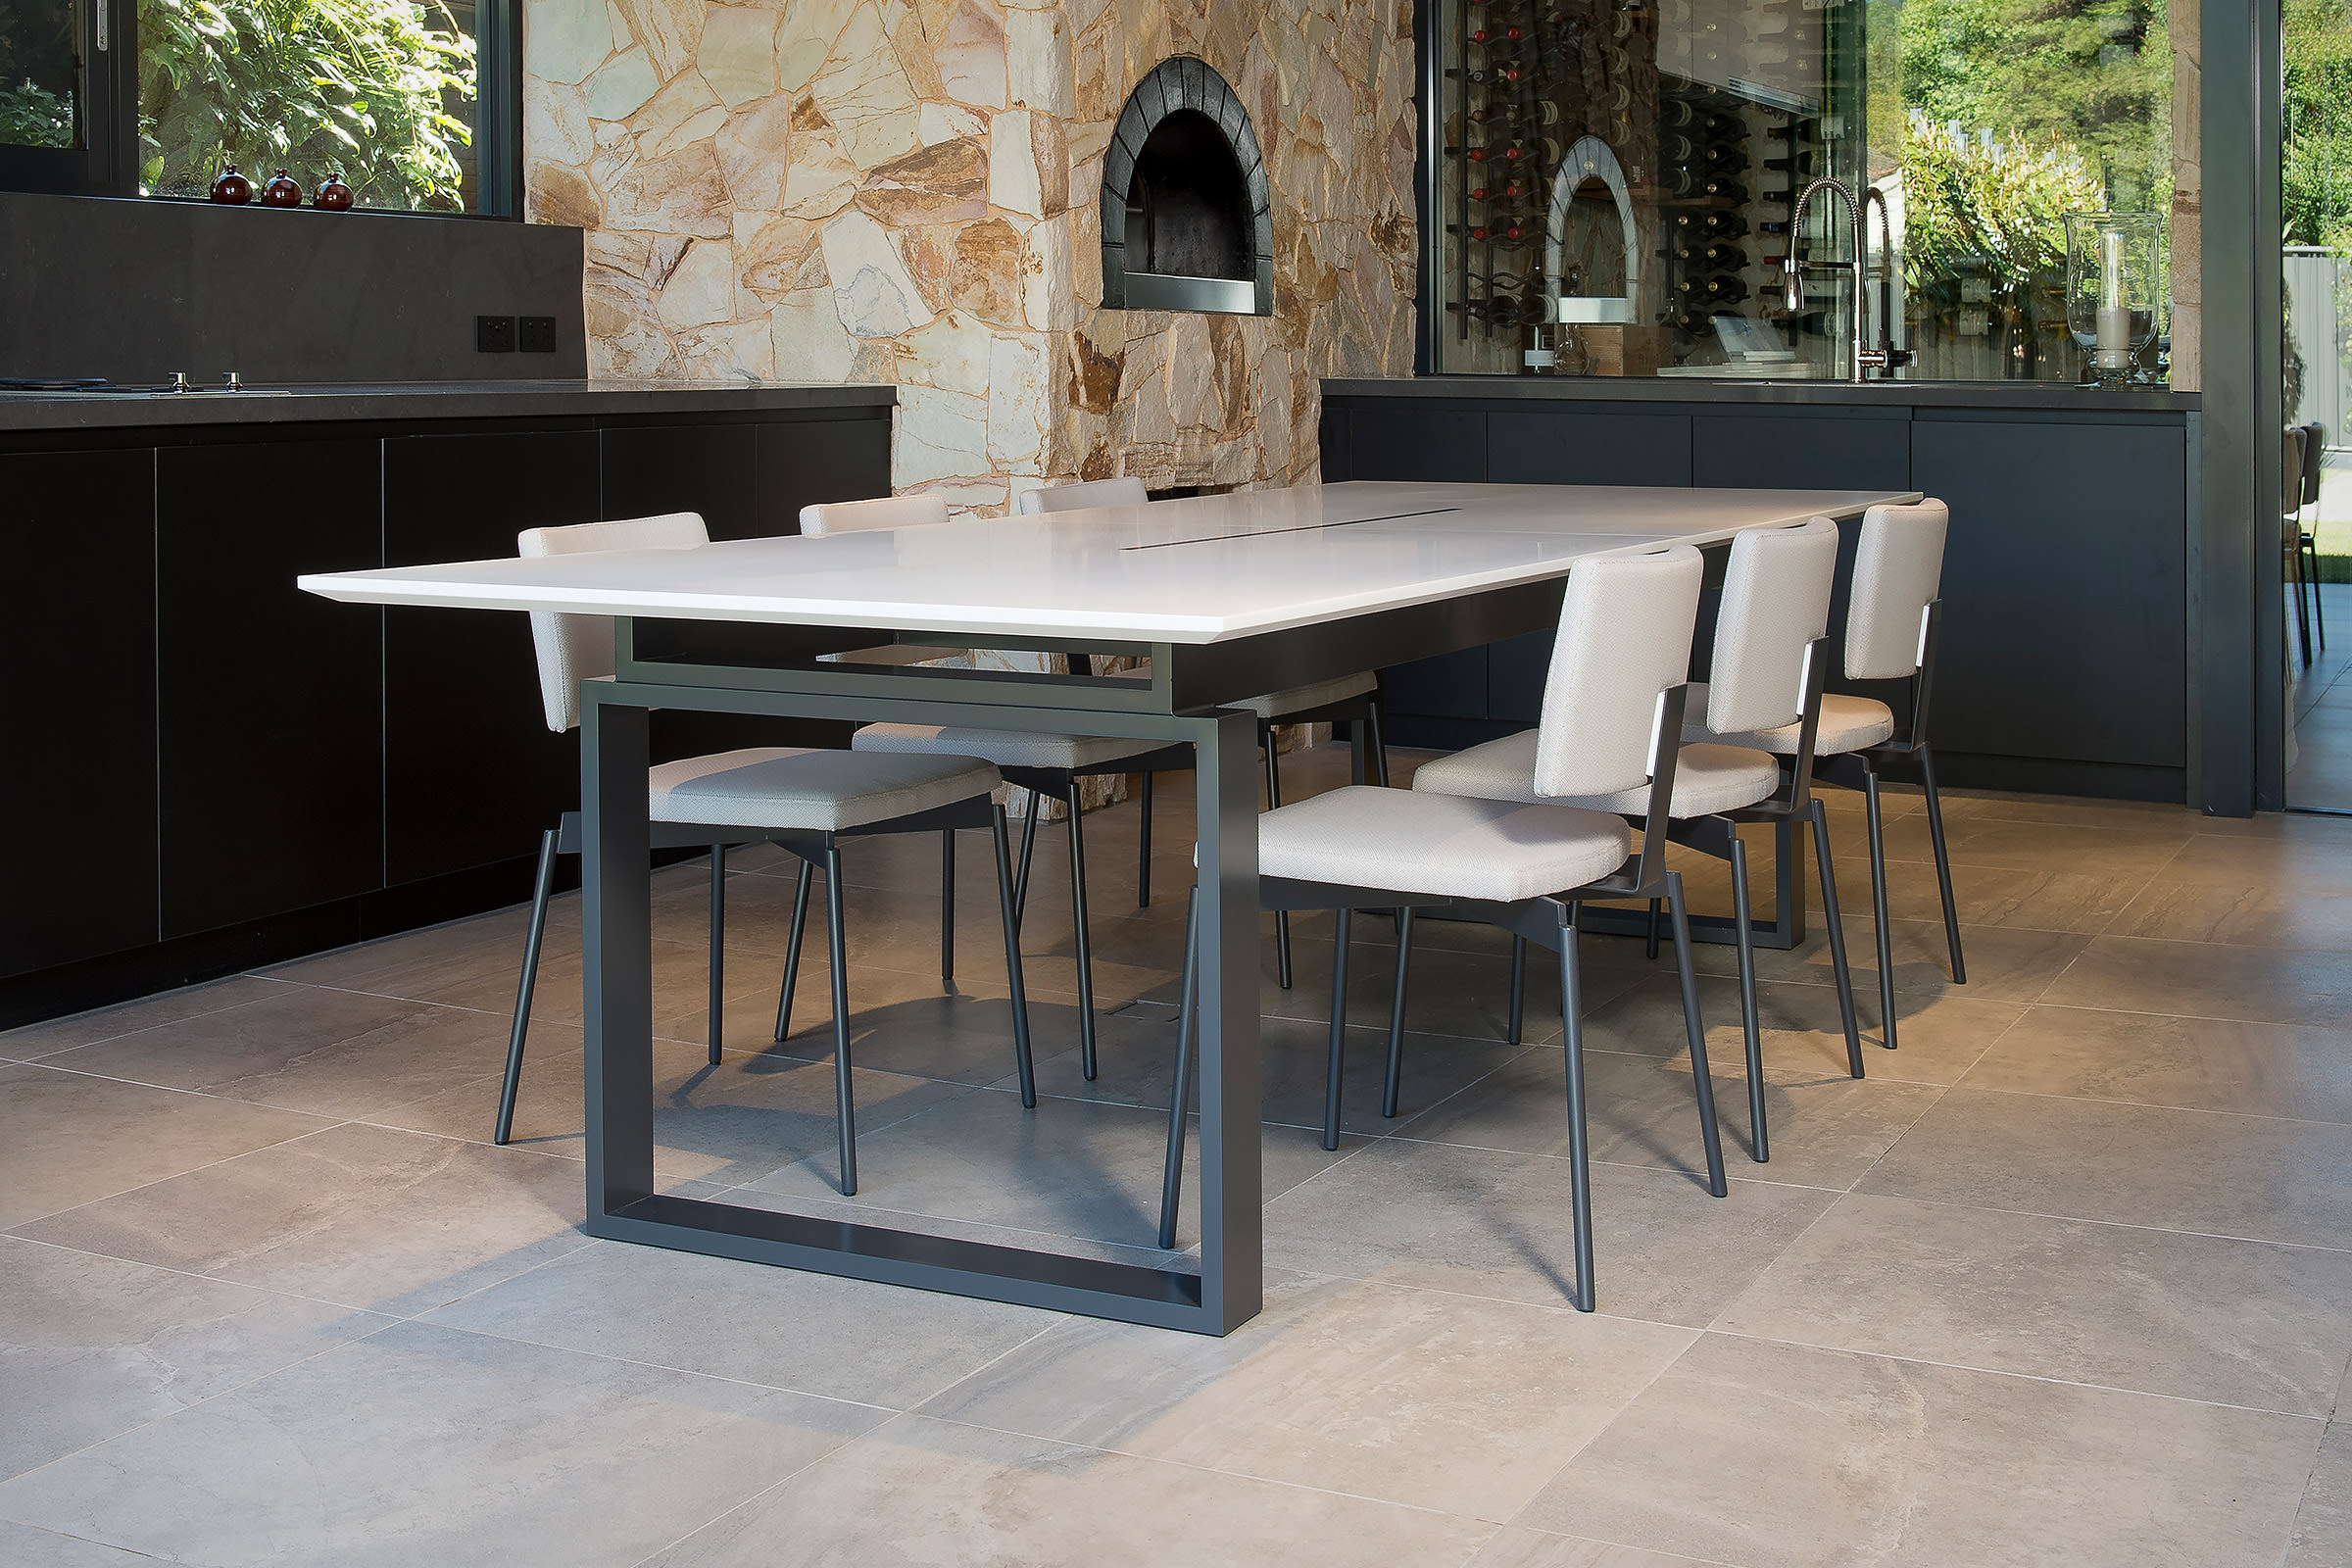 a glimpse of the wood fired oven surrounded by natural sand stone in the background invites you sit at the designer dining table created by Australian Designer FrancoCrea